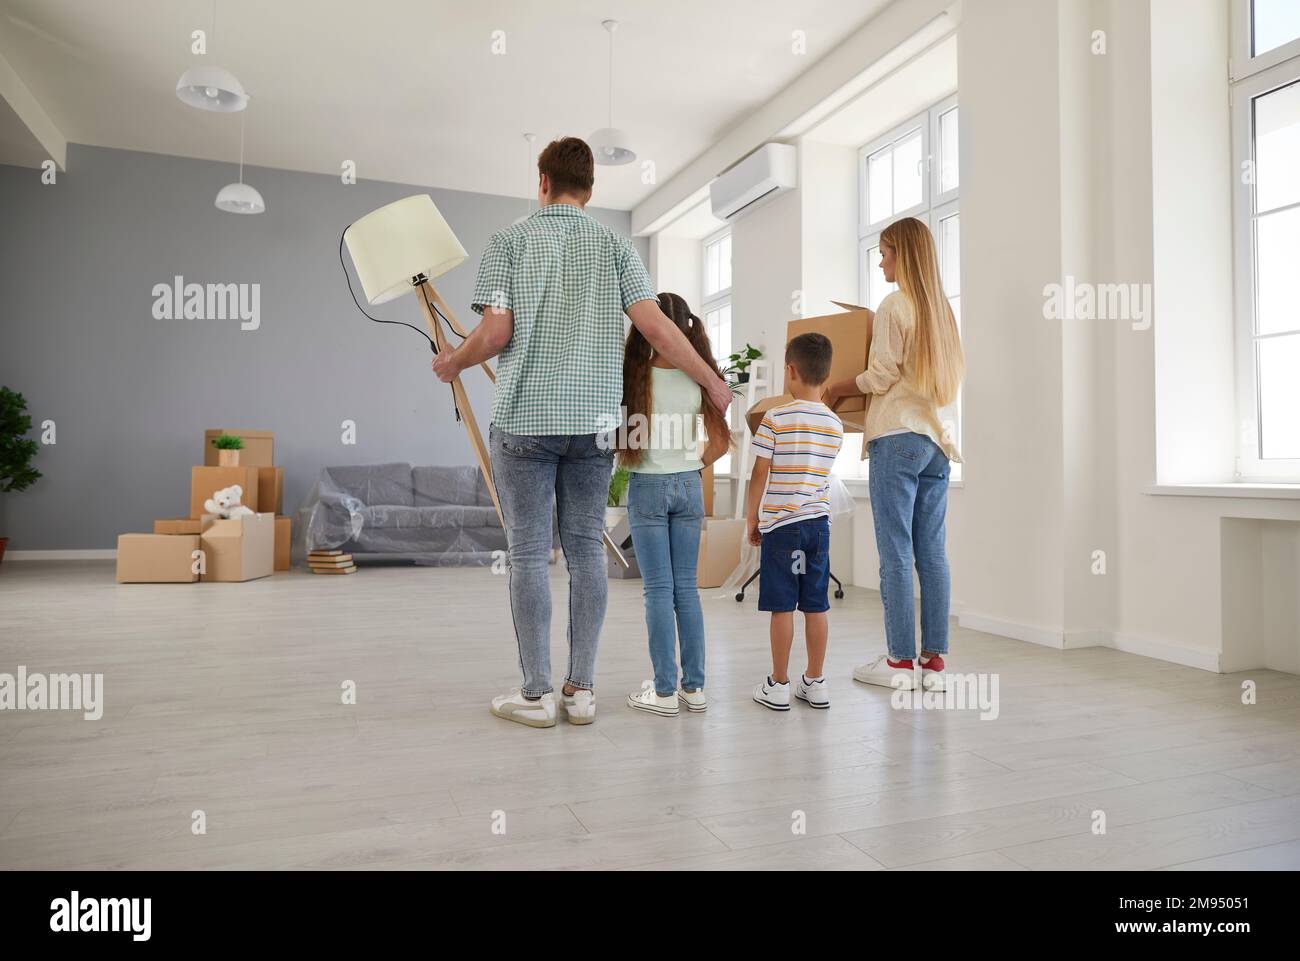 Happy young family with two children moves into their new spacious apartment house. Stock Photo